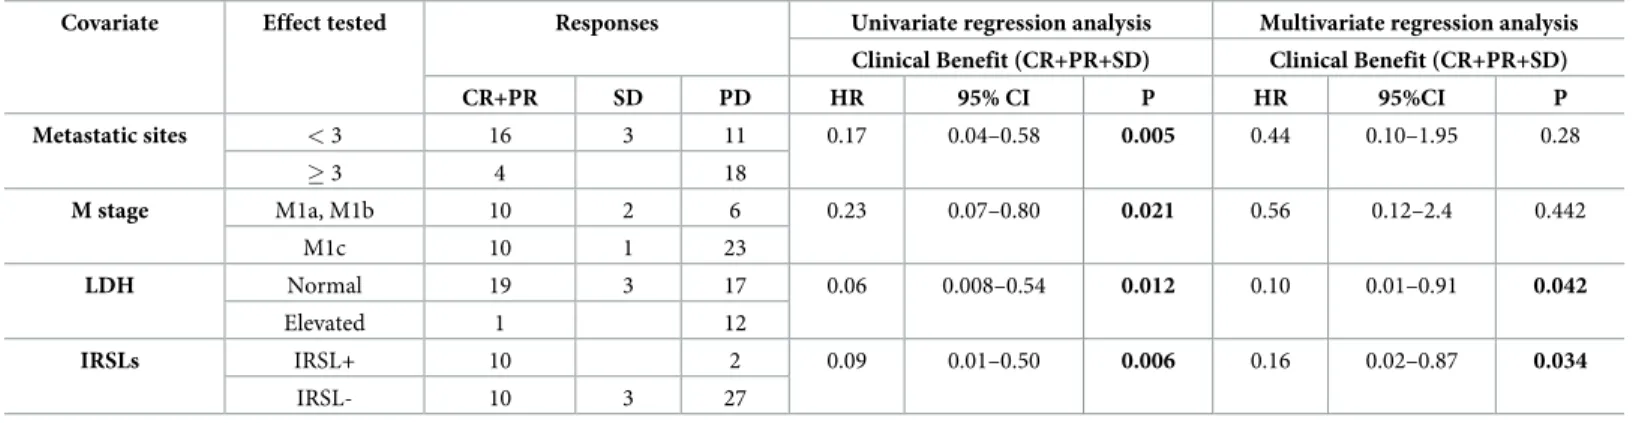 Table 3. Univariate and multivariate regression analysis of factors associated to response to target therapy.